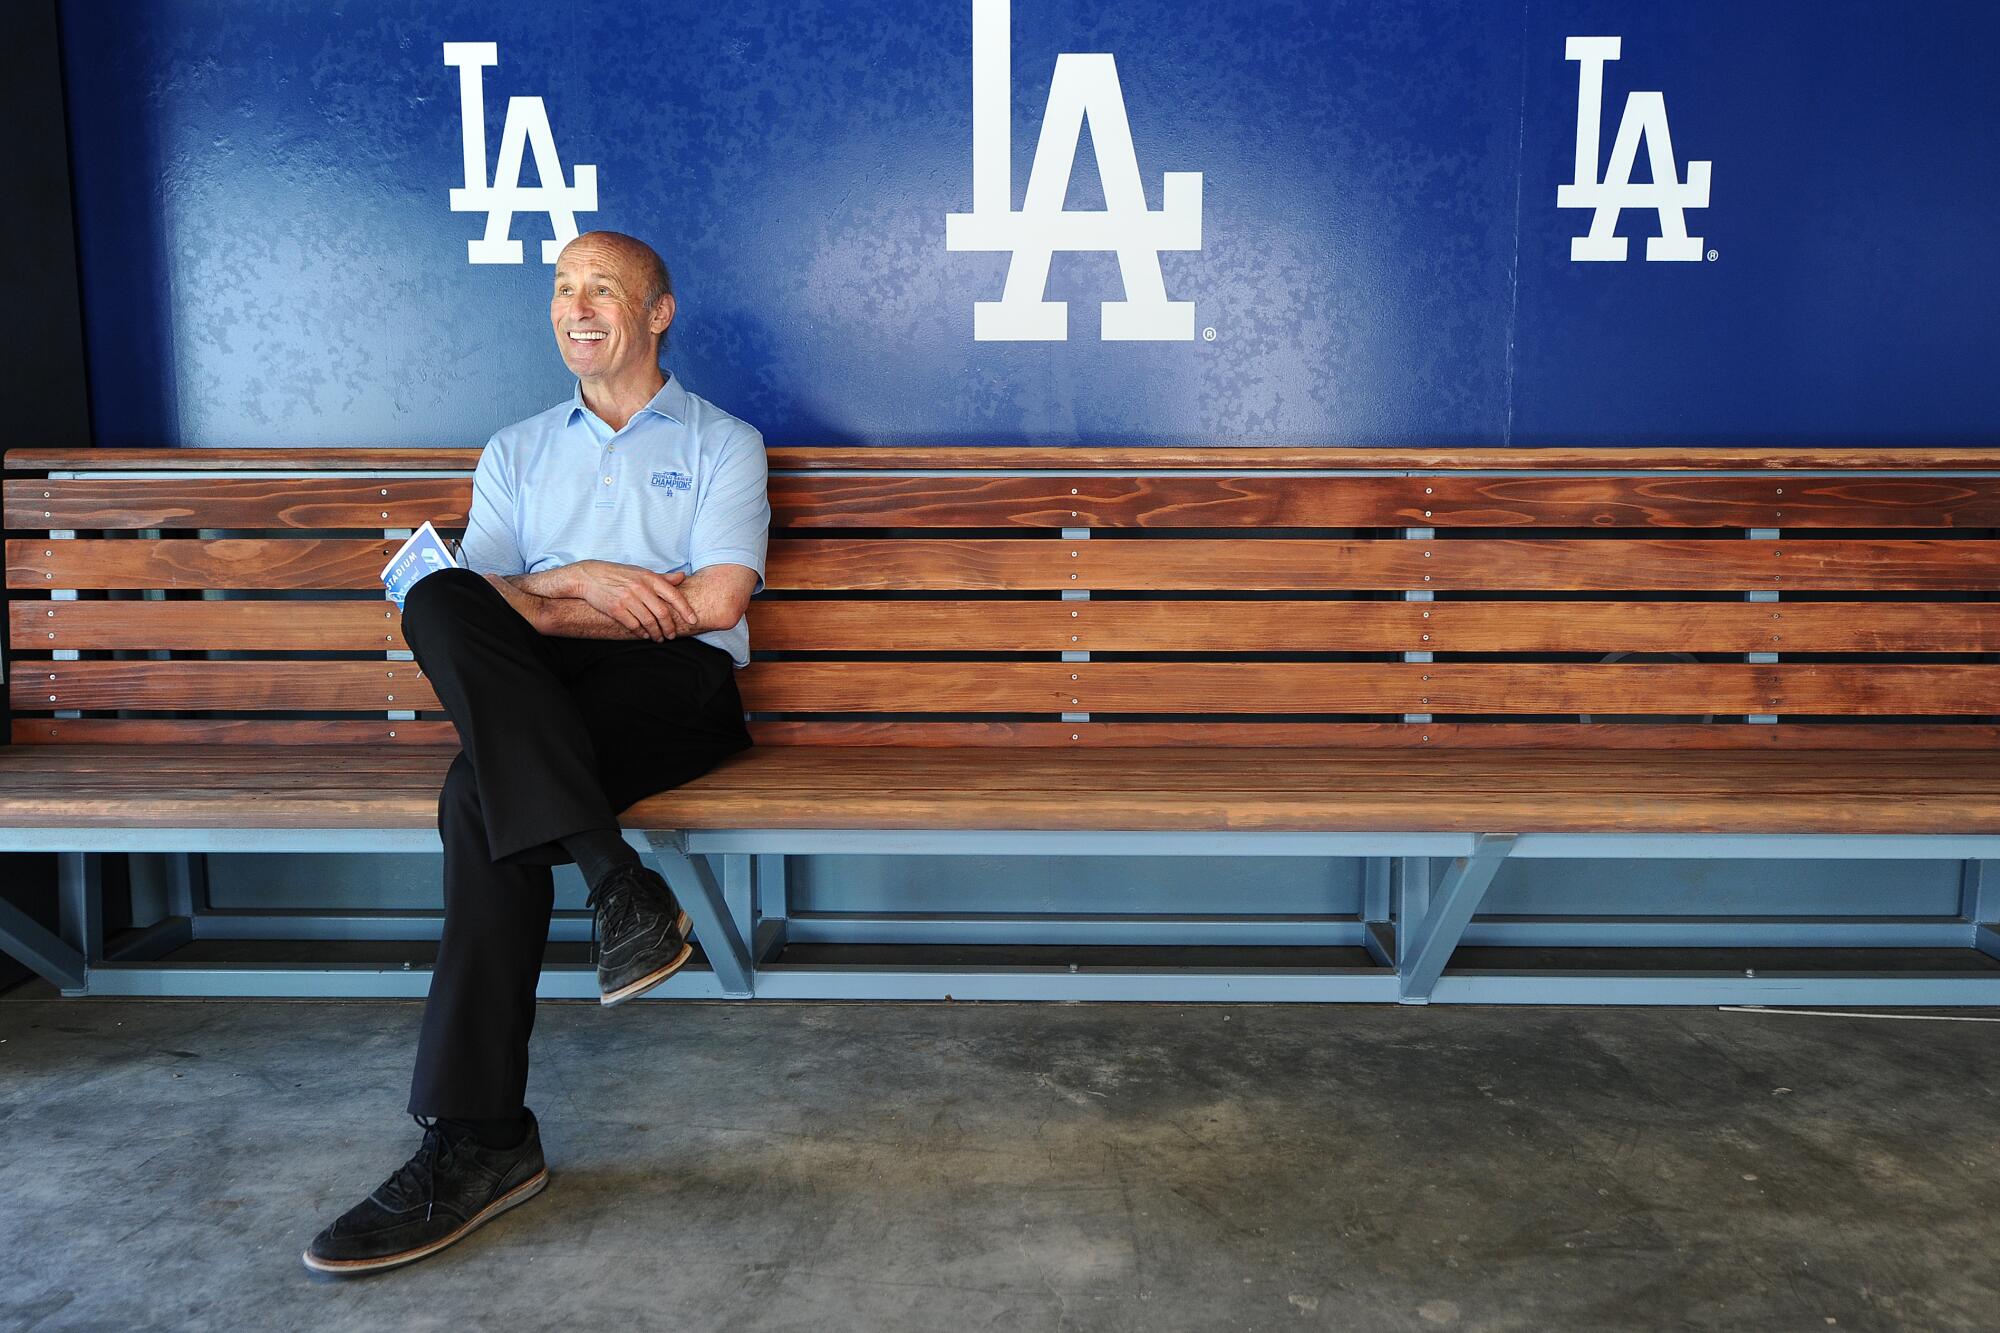 Dodgers president Stan Kasten sits on a wood-panel bench with blue Dodgers logos on the wall behind him.